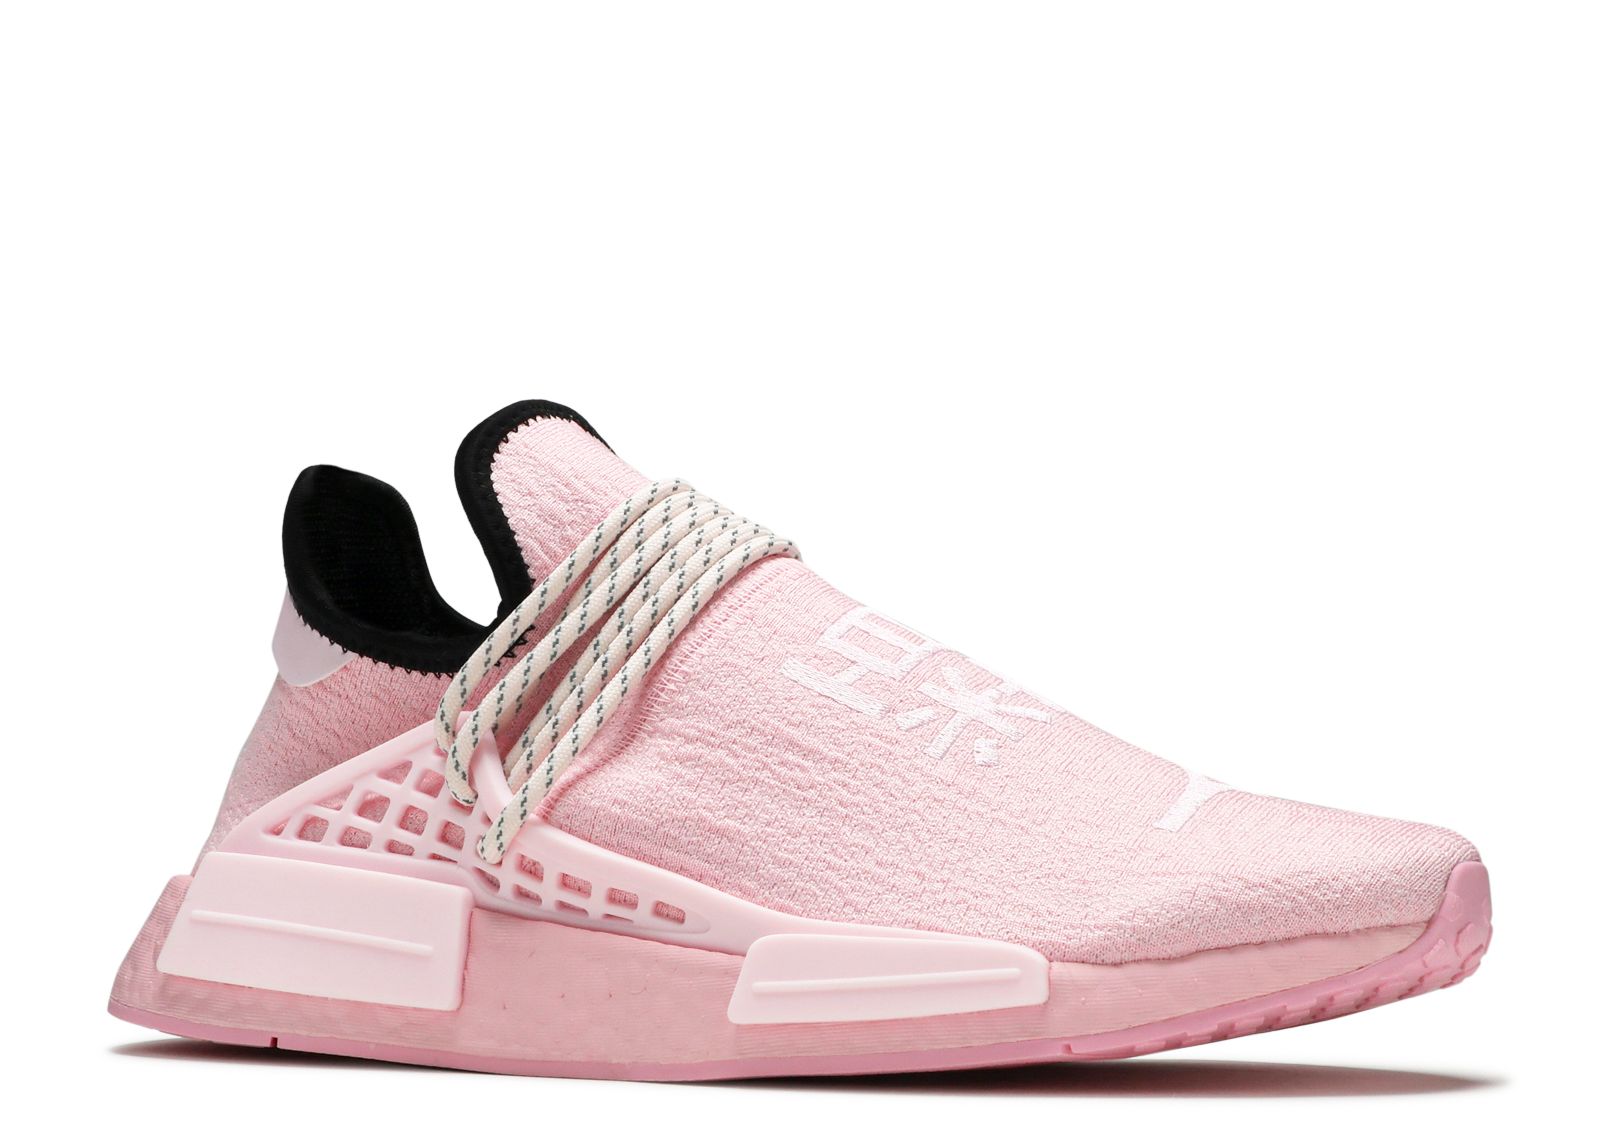 adidas Pharrell X Nmd Human Race Trail Prd in Pink for Men